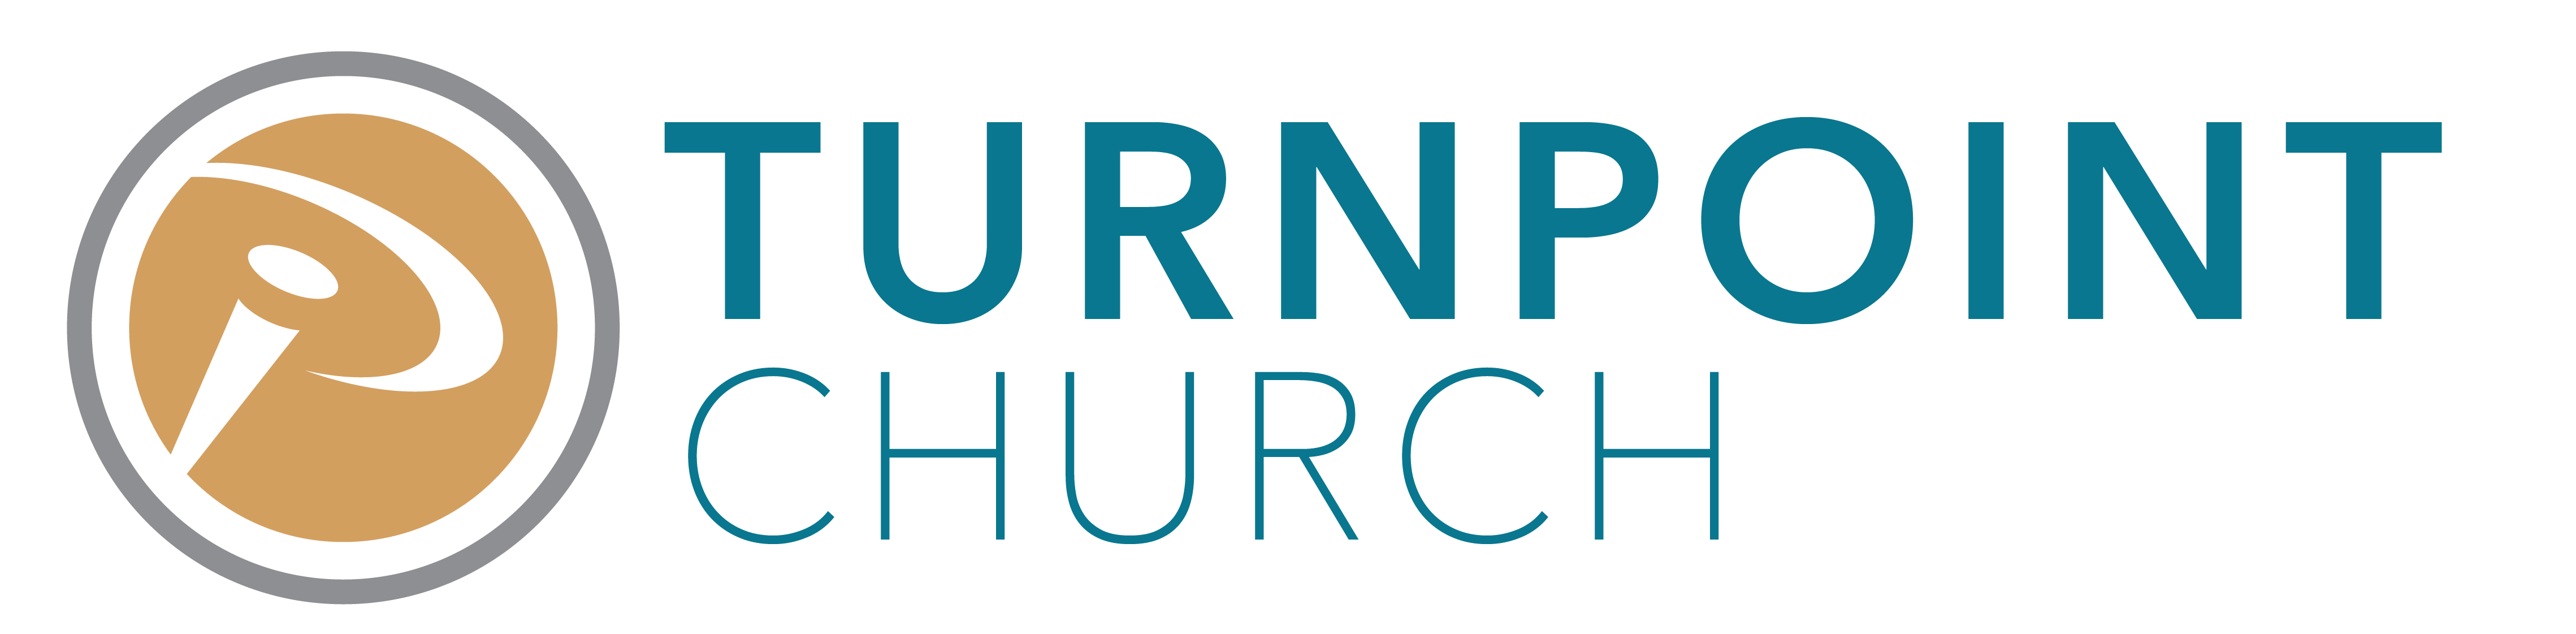 TurnPoint Church